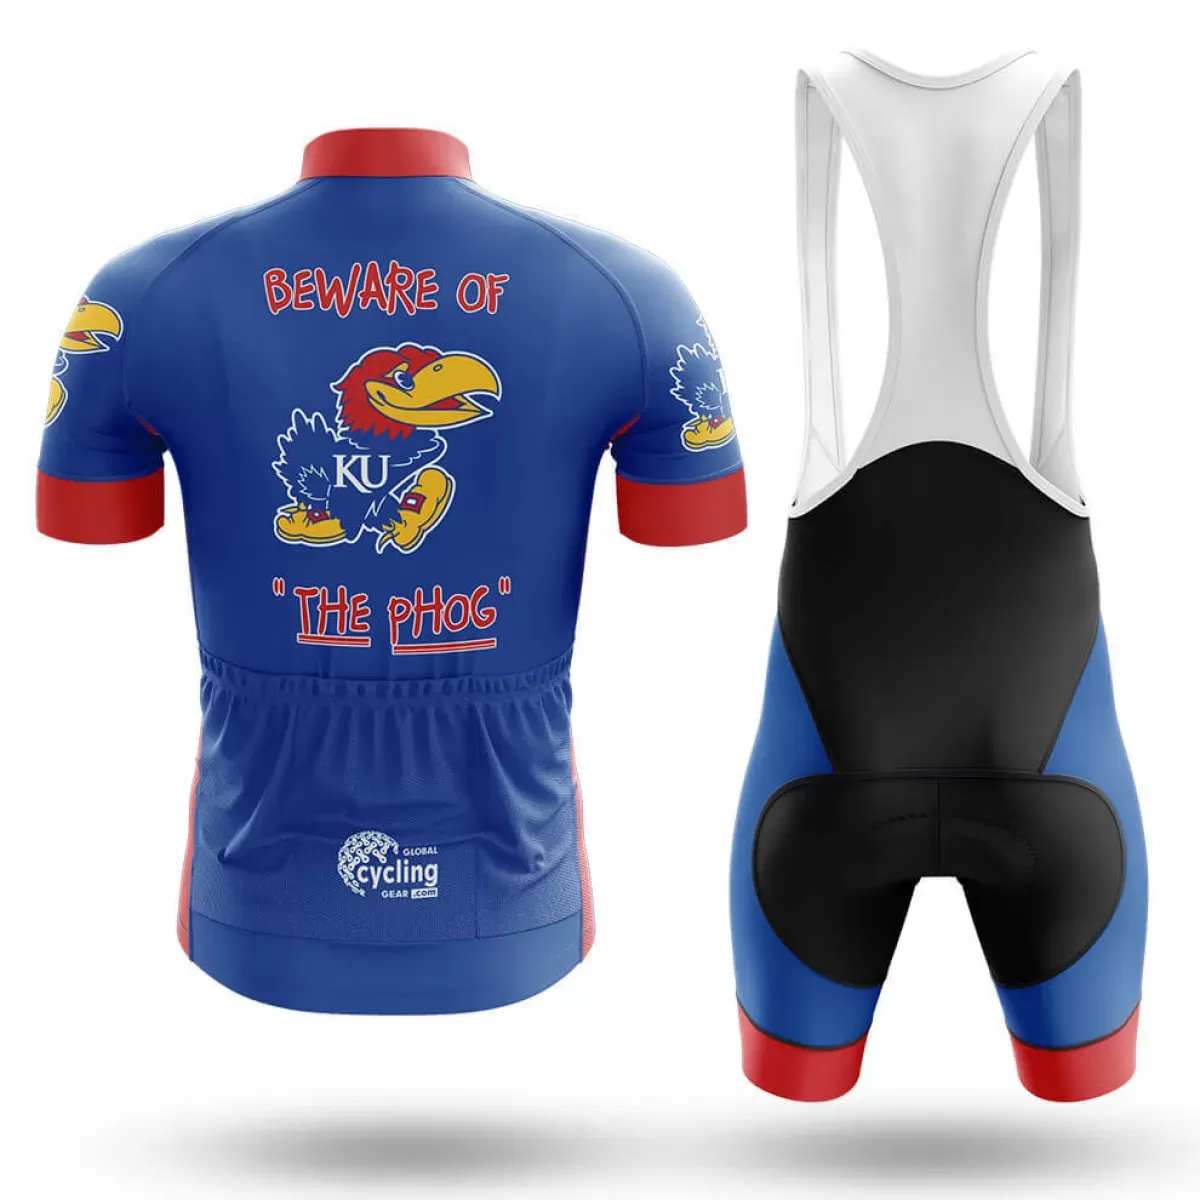 Phog Cycling Jersey Kit - Premium Polyester and Spandex Bib Shorts for ...